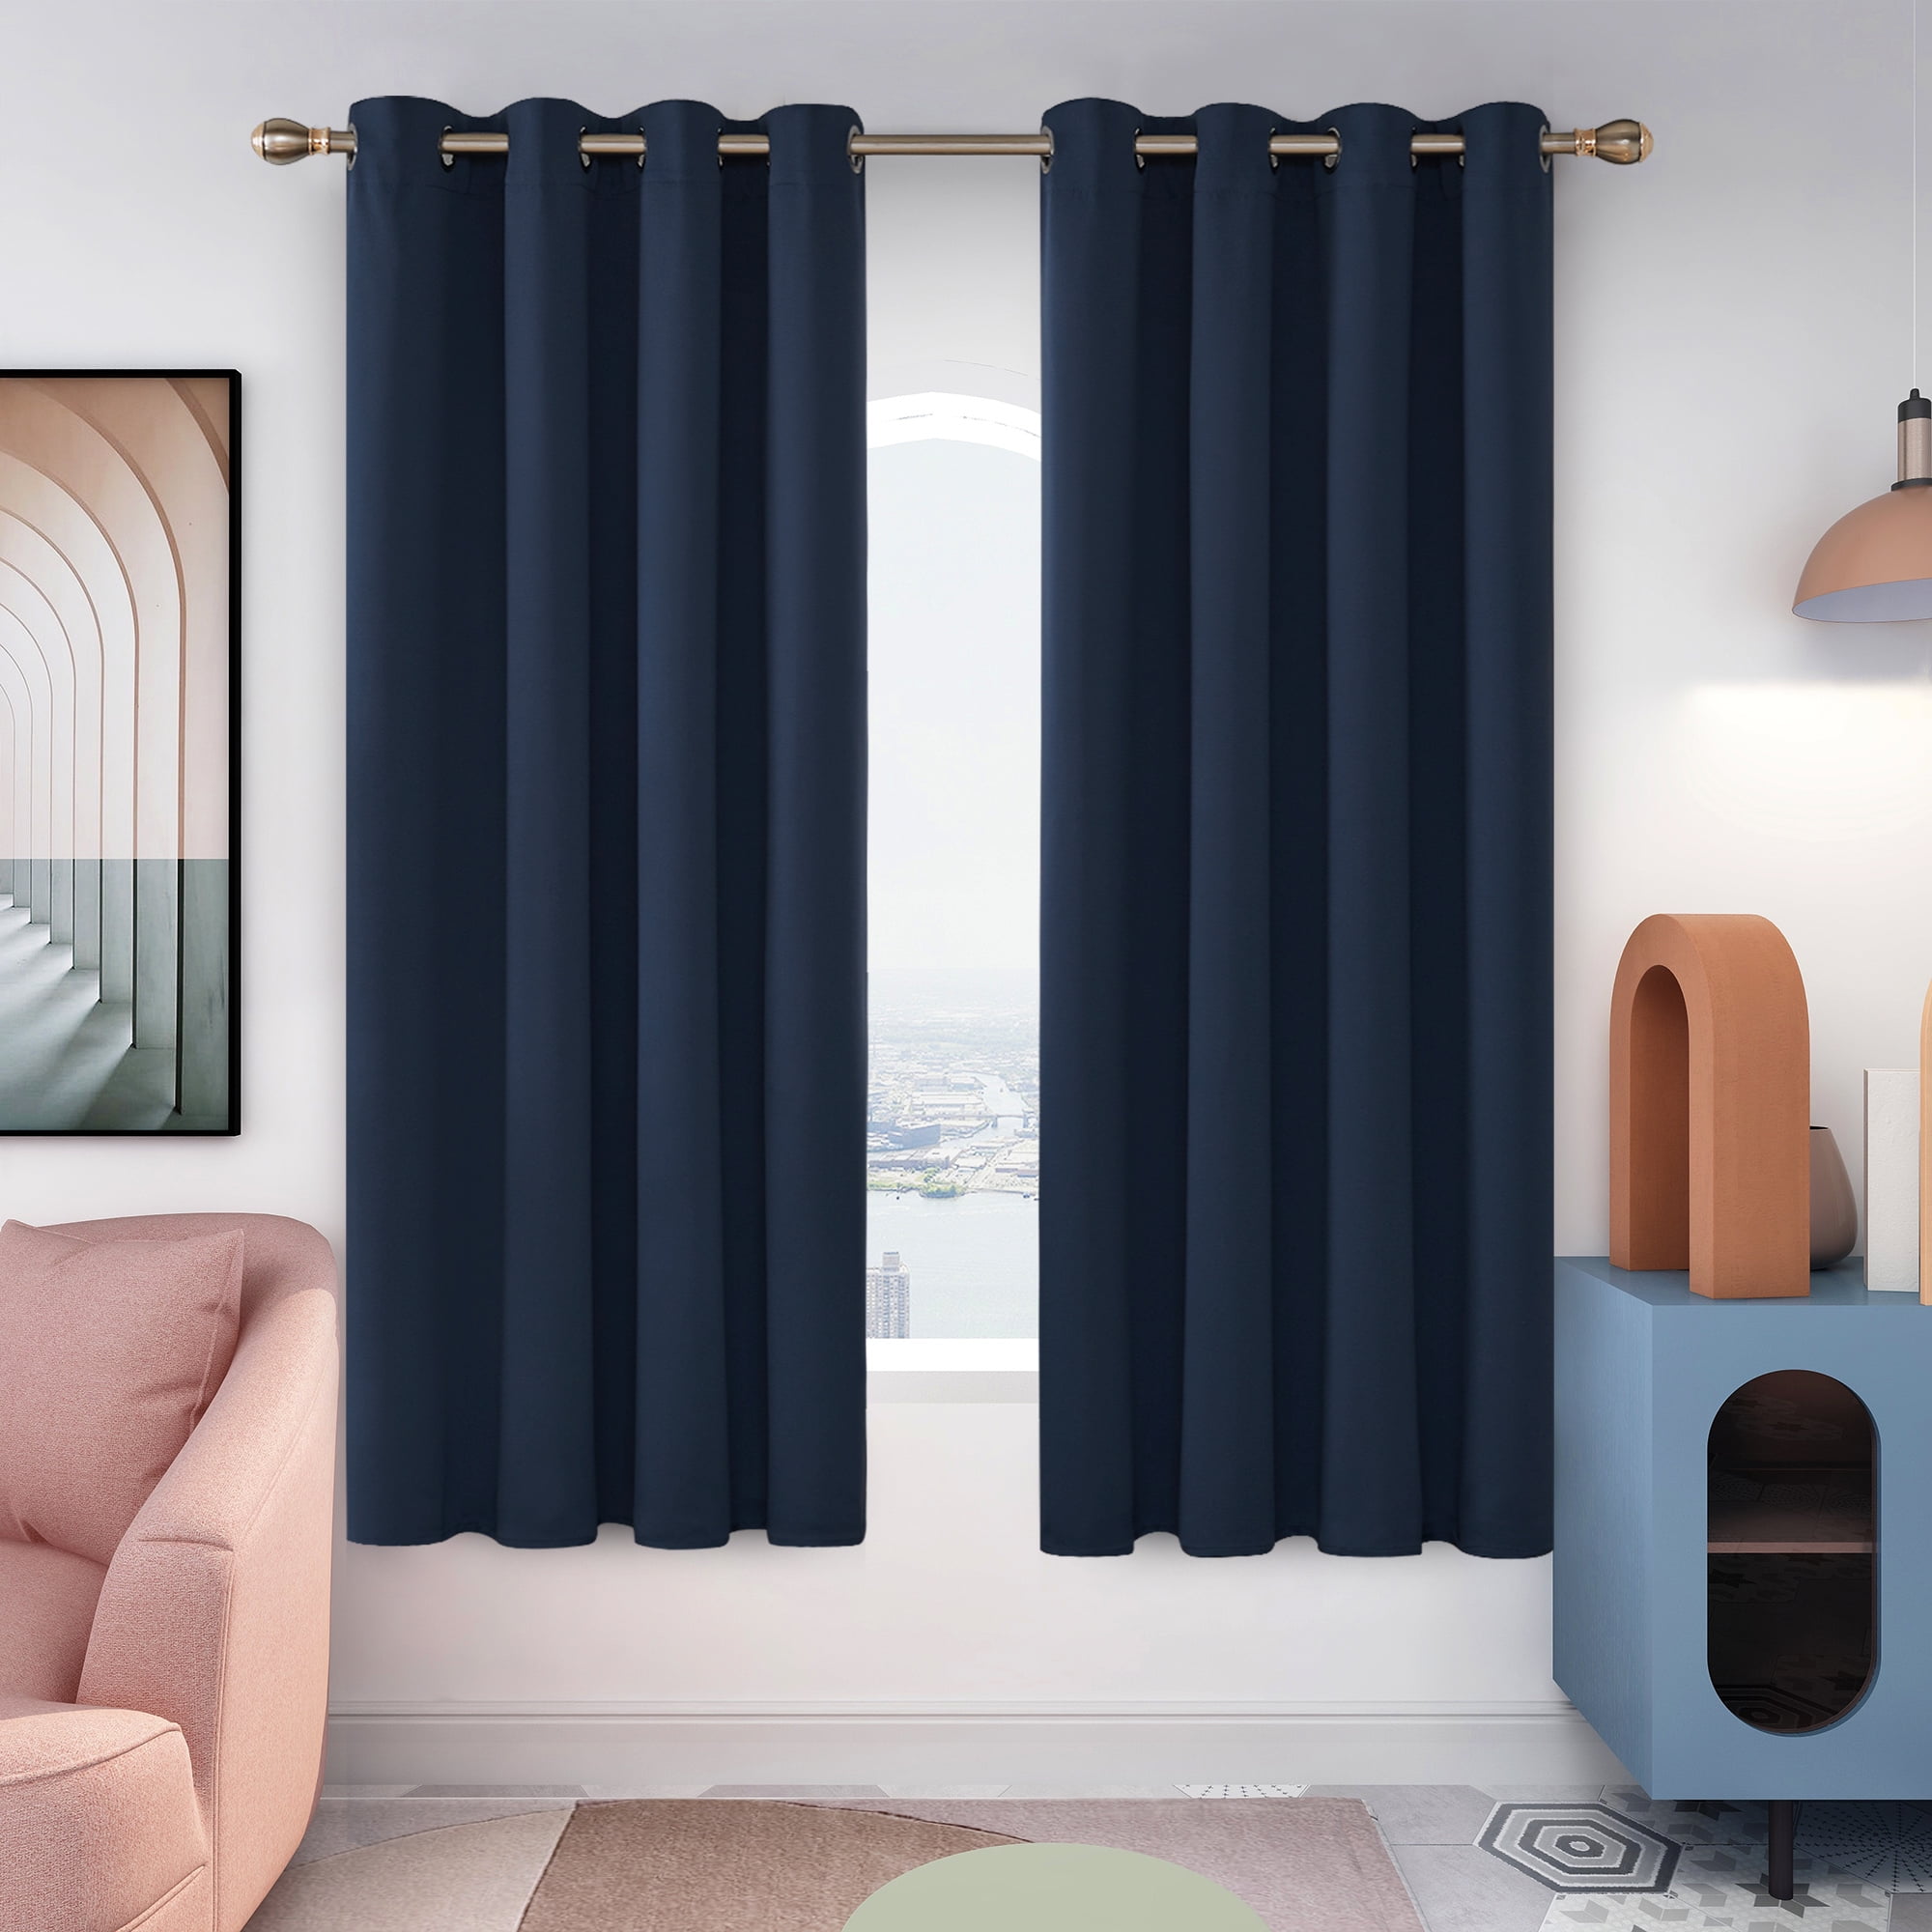  MIUCO Blackout Curtains Room Darkening Curtains Textured Grommet  Curtains for Window Treatment 2 Panels 52x63 Inch Long Teal : Home & Kitchen